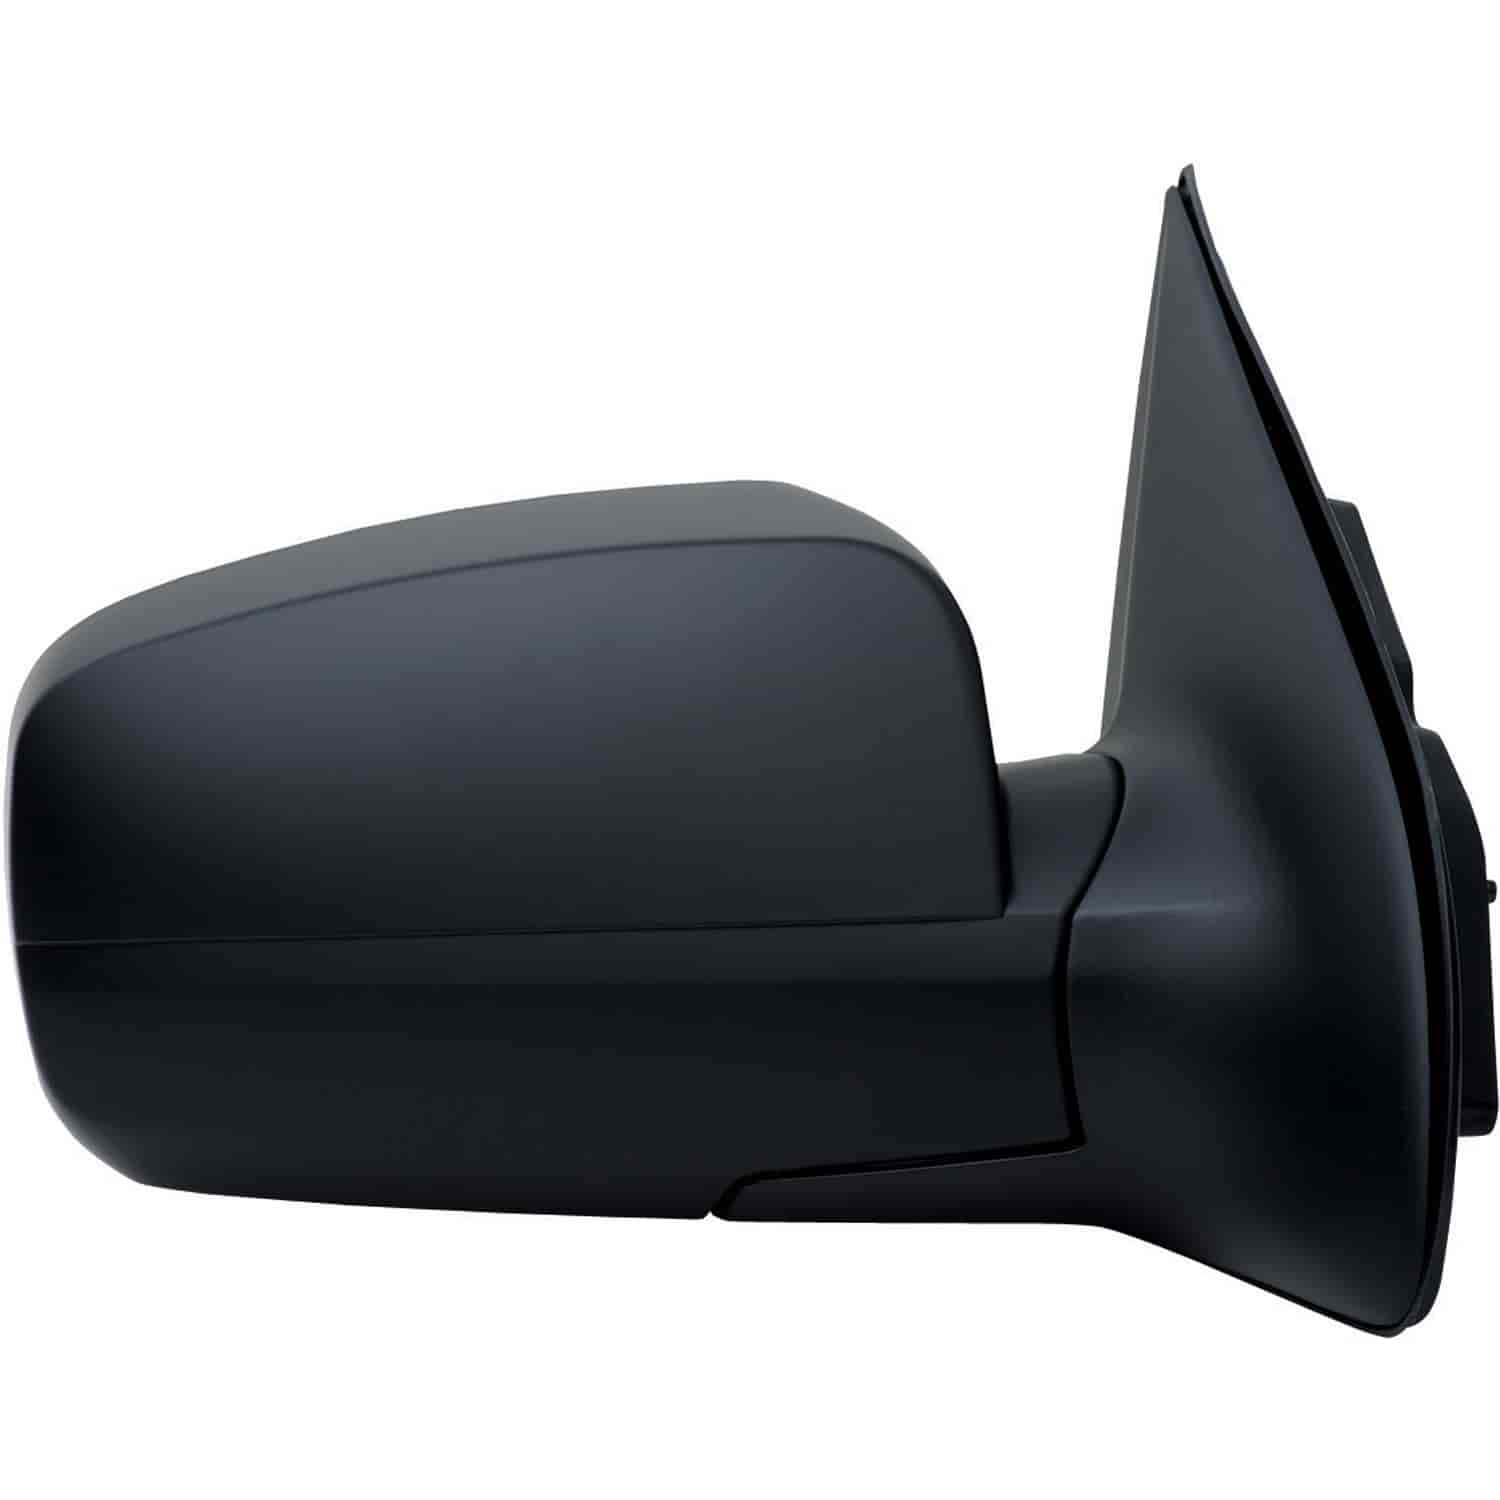 OEM Style Replacement mirror for 03-09 Kia Sorento Base LX model passenger side mirror tested to fit